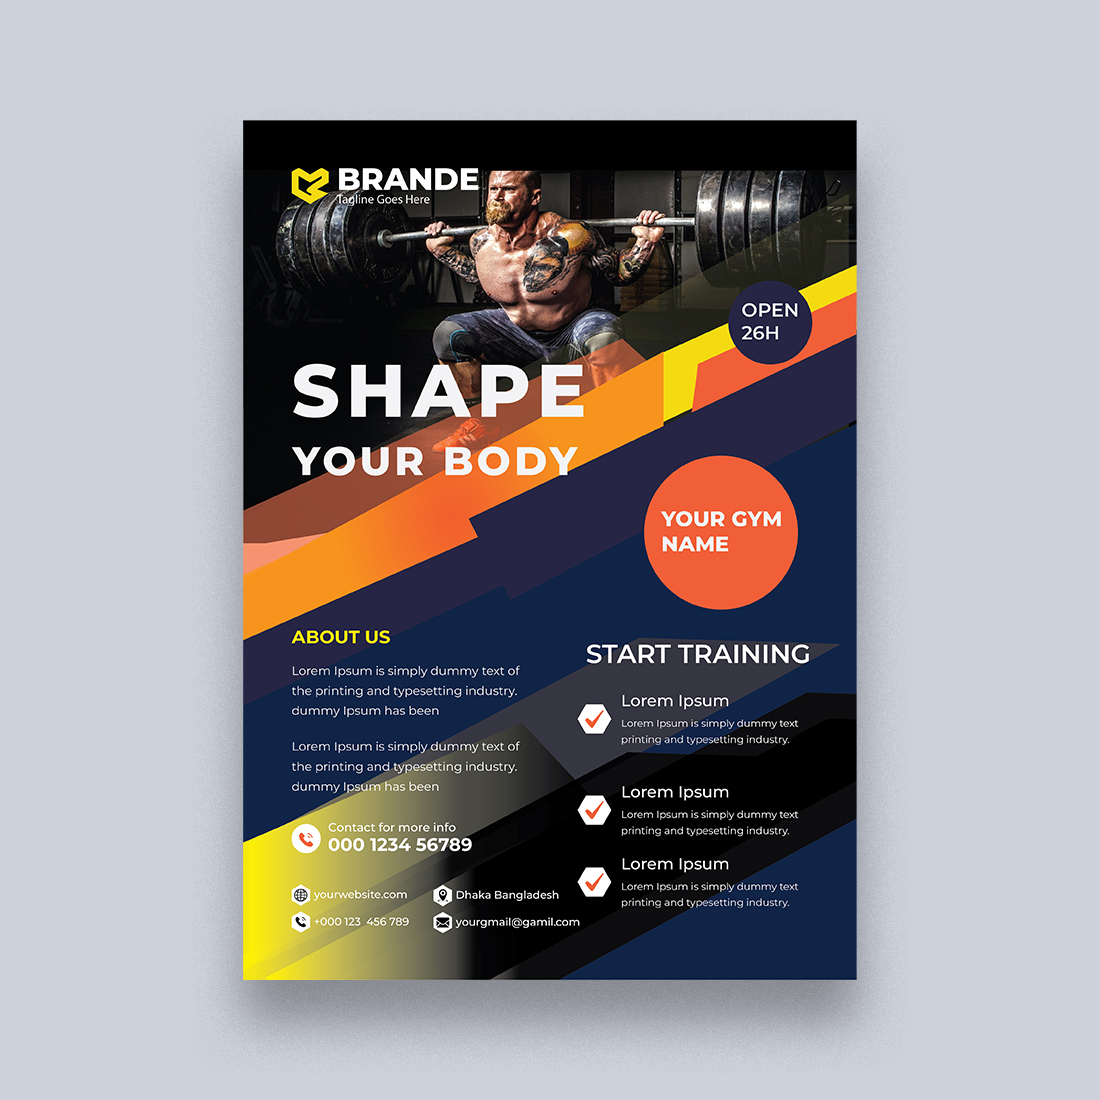 Gym Flyer Design Template cover image.